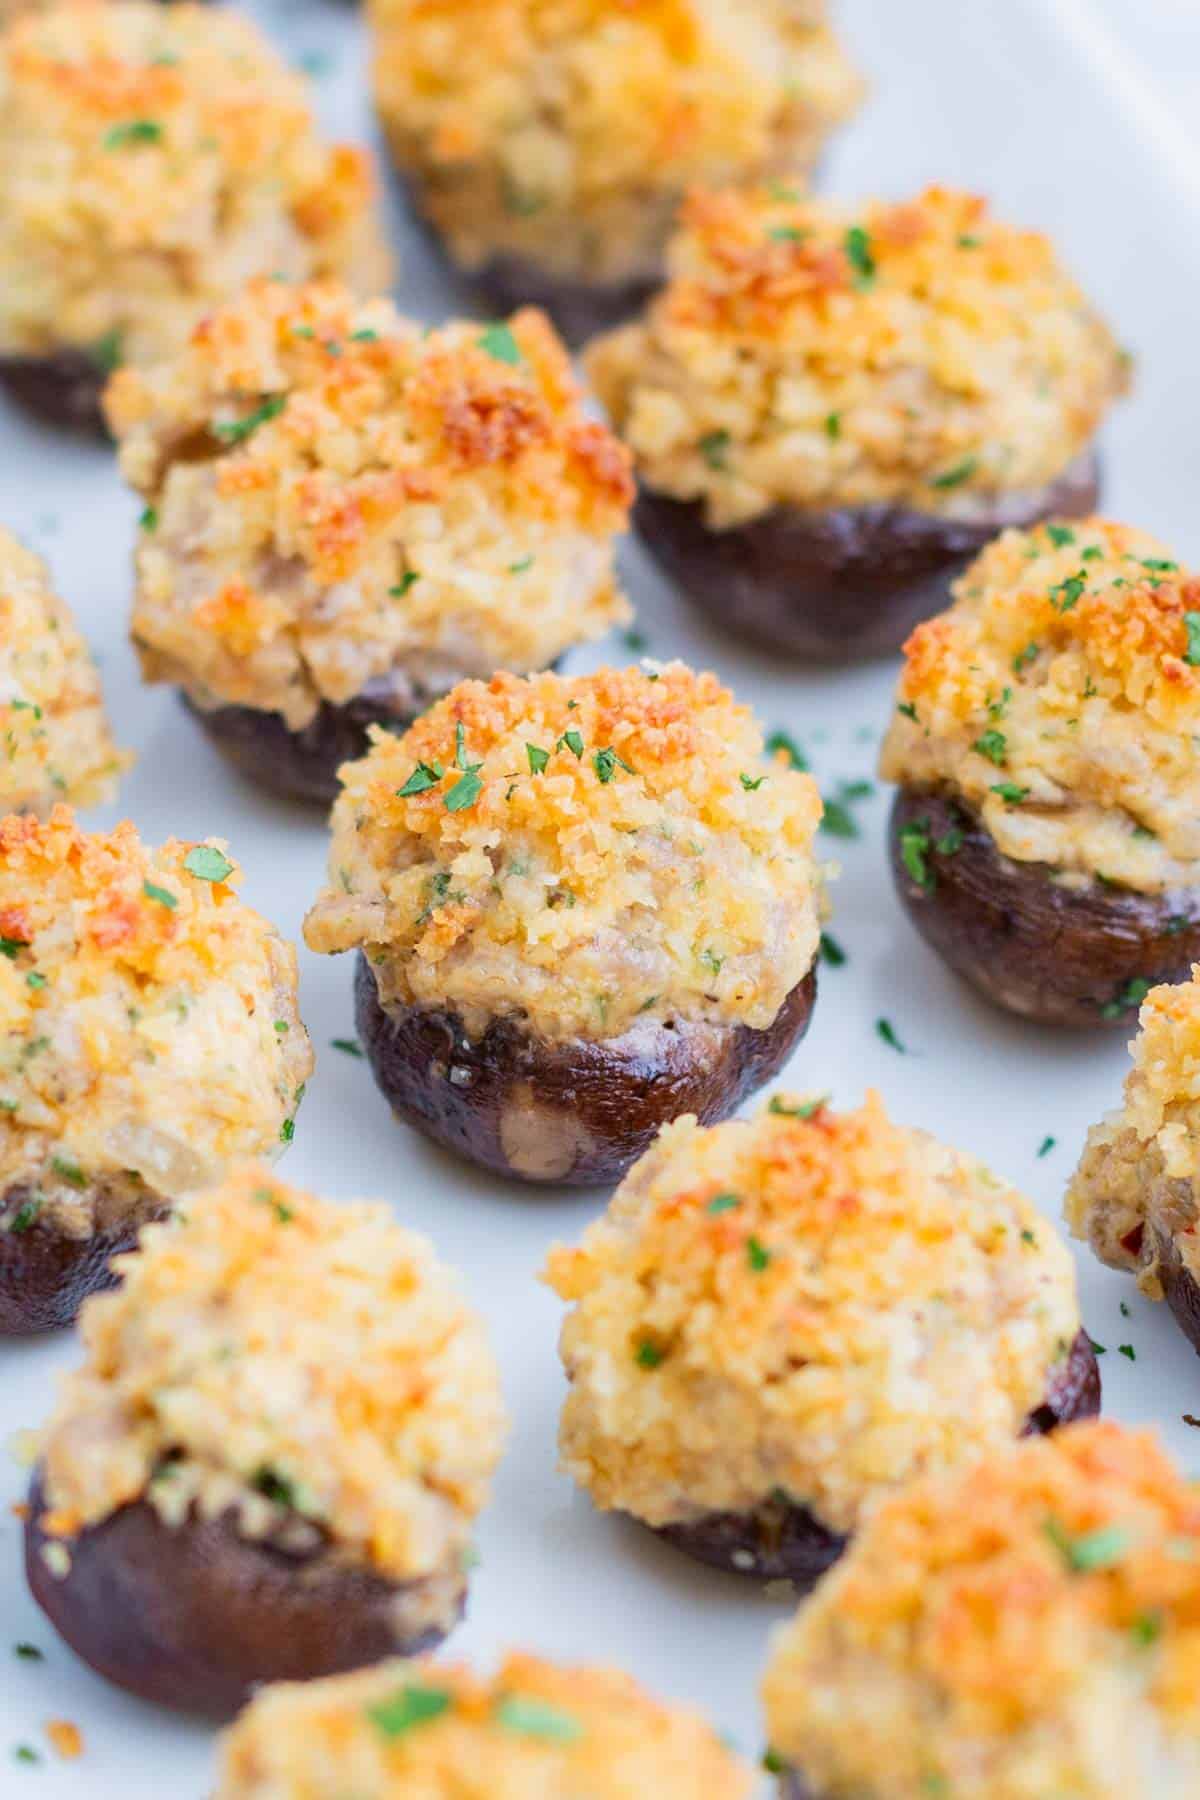 Mushrooms are stuffed with sausage and cheese then baked until golden, then served on a plate.